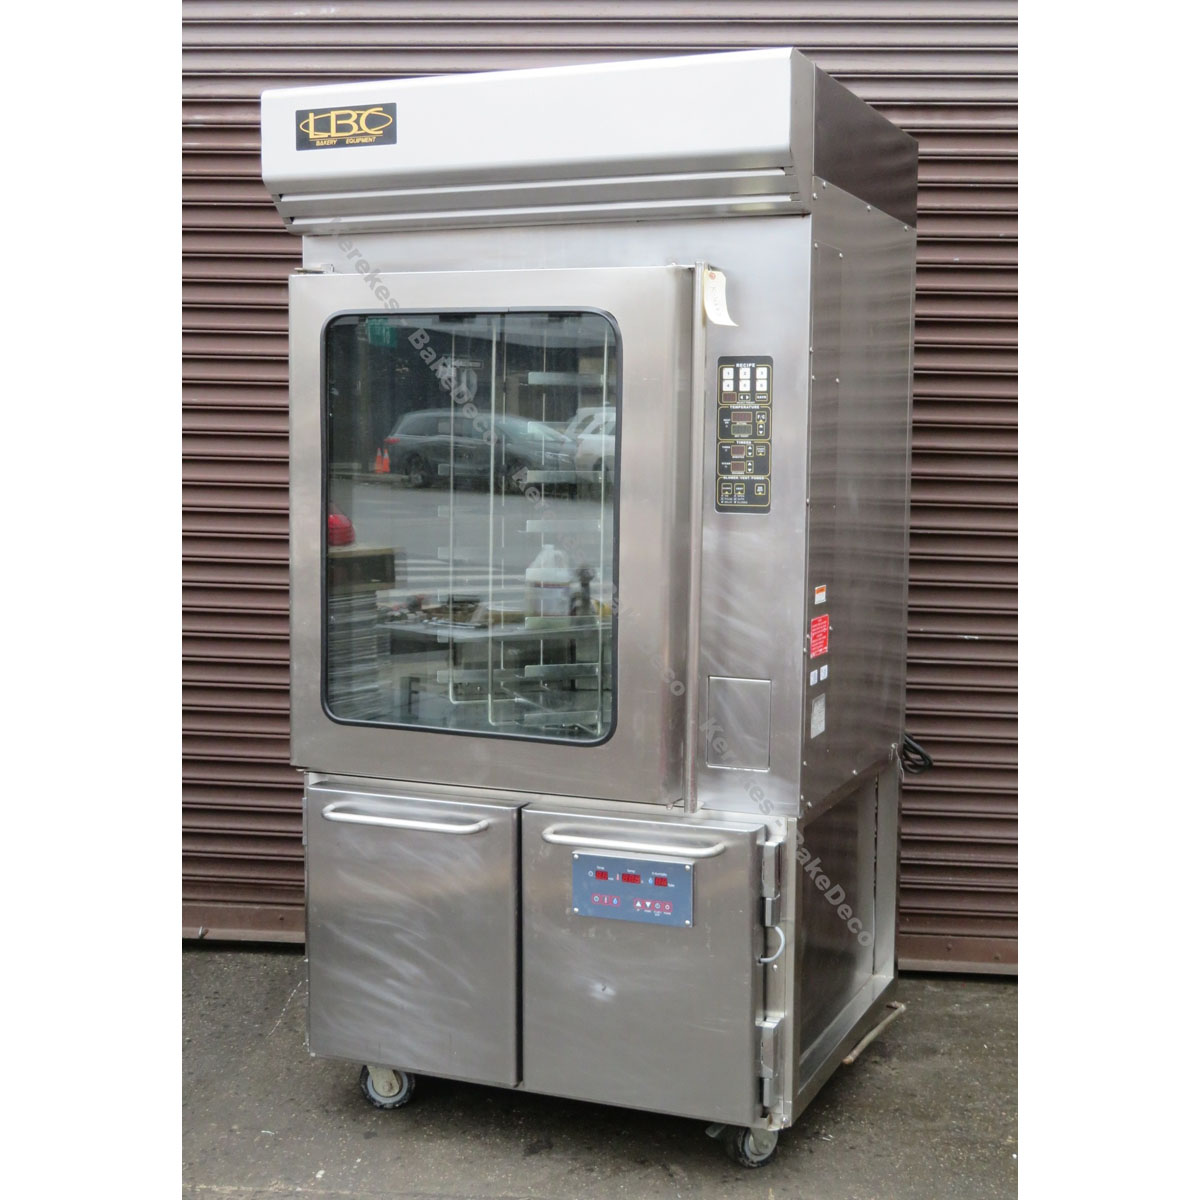 LBC LMO-E8 Electric Mini Rack Oven With Proofer, Used Excellent ...